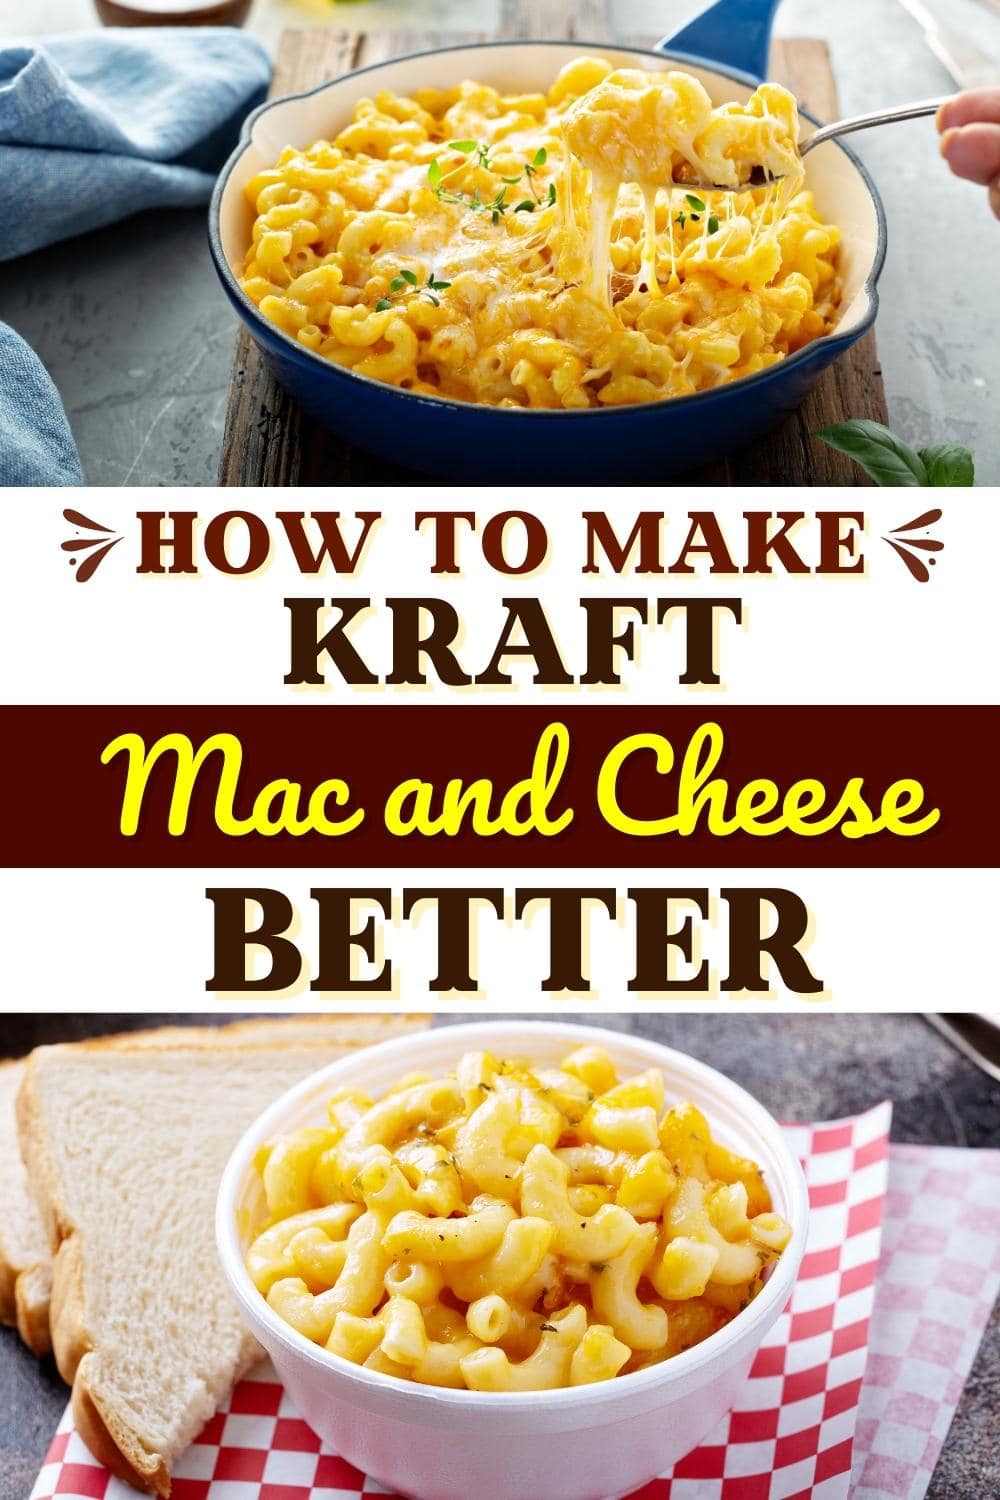 How To Make Kraft Mac & Cheese Better (8 Easy Tricks) - Insanely Good